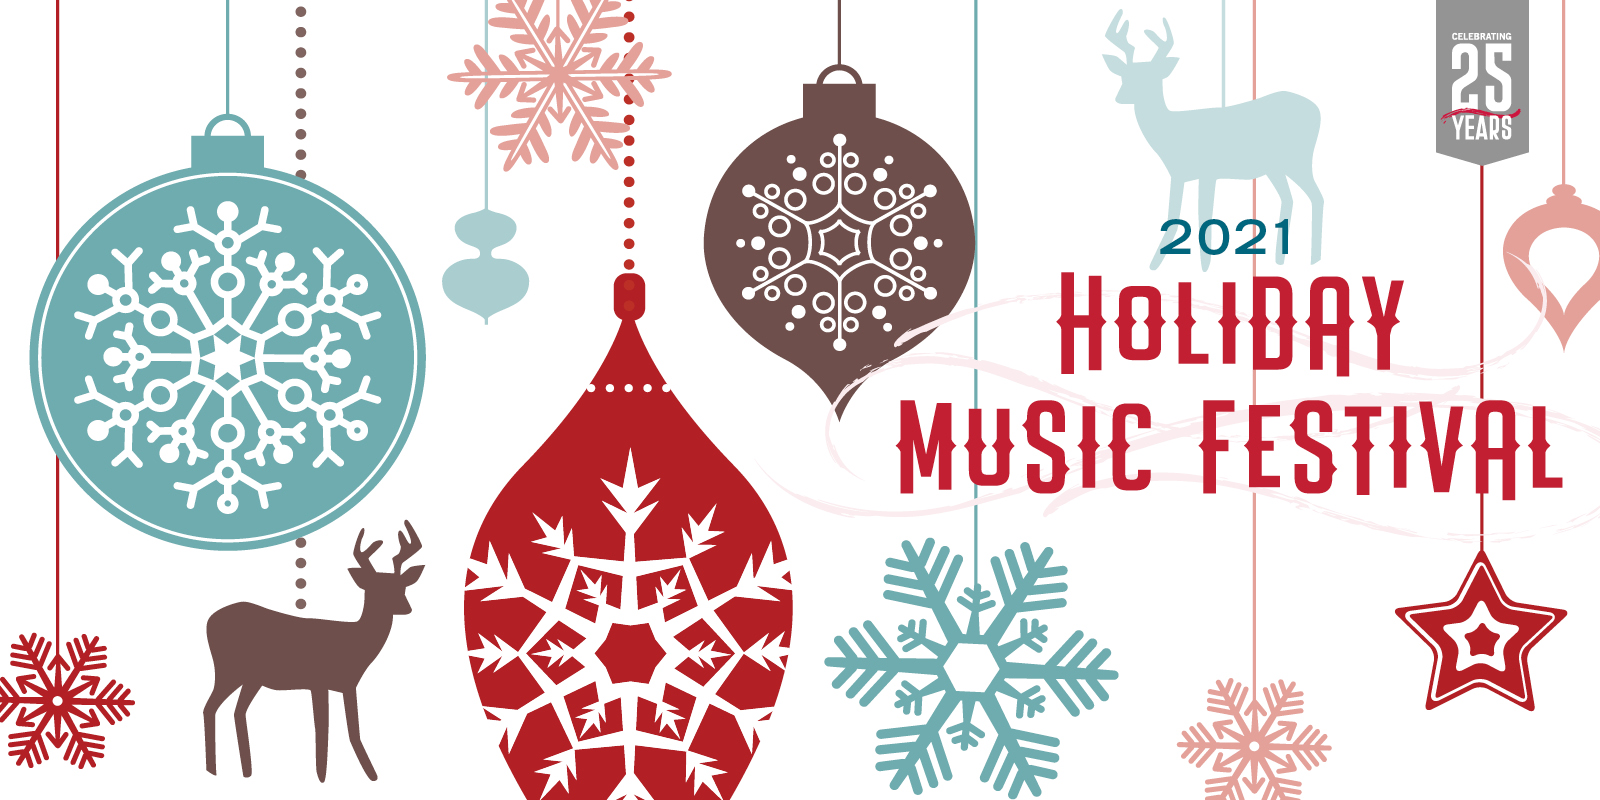 2021 Holiday Music Festival